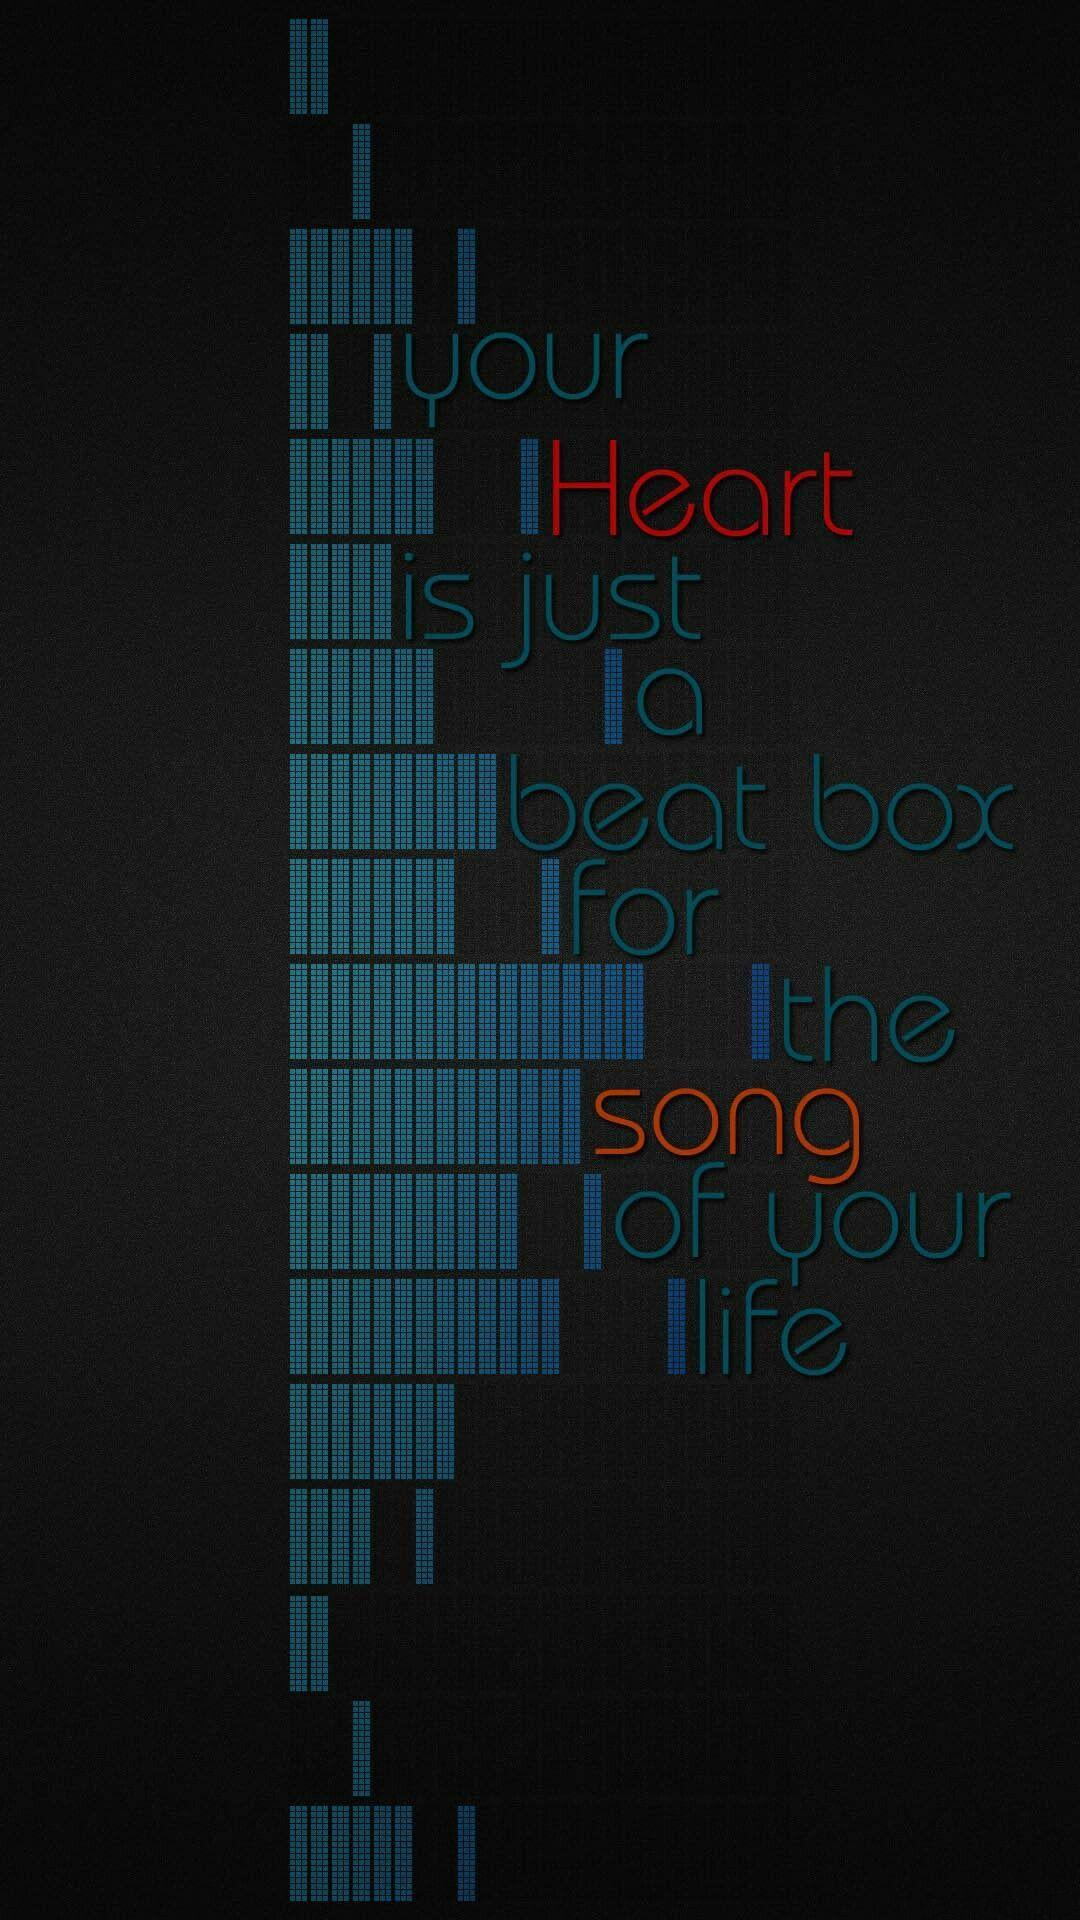 Your heart is just a beat box for the song of your life. Music